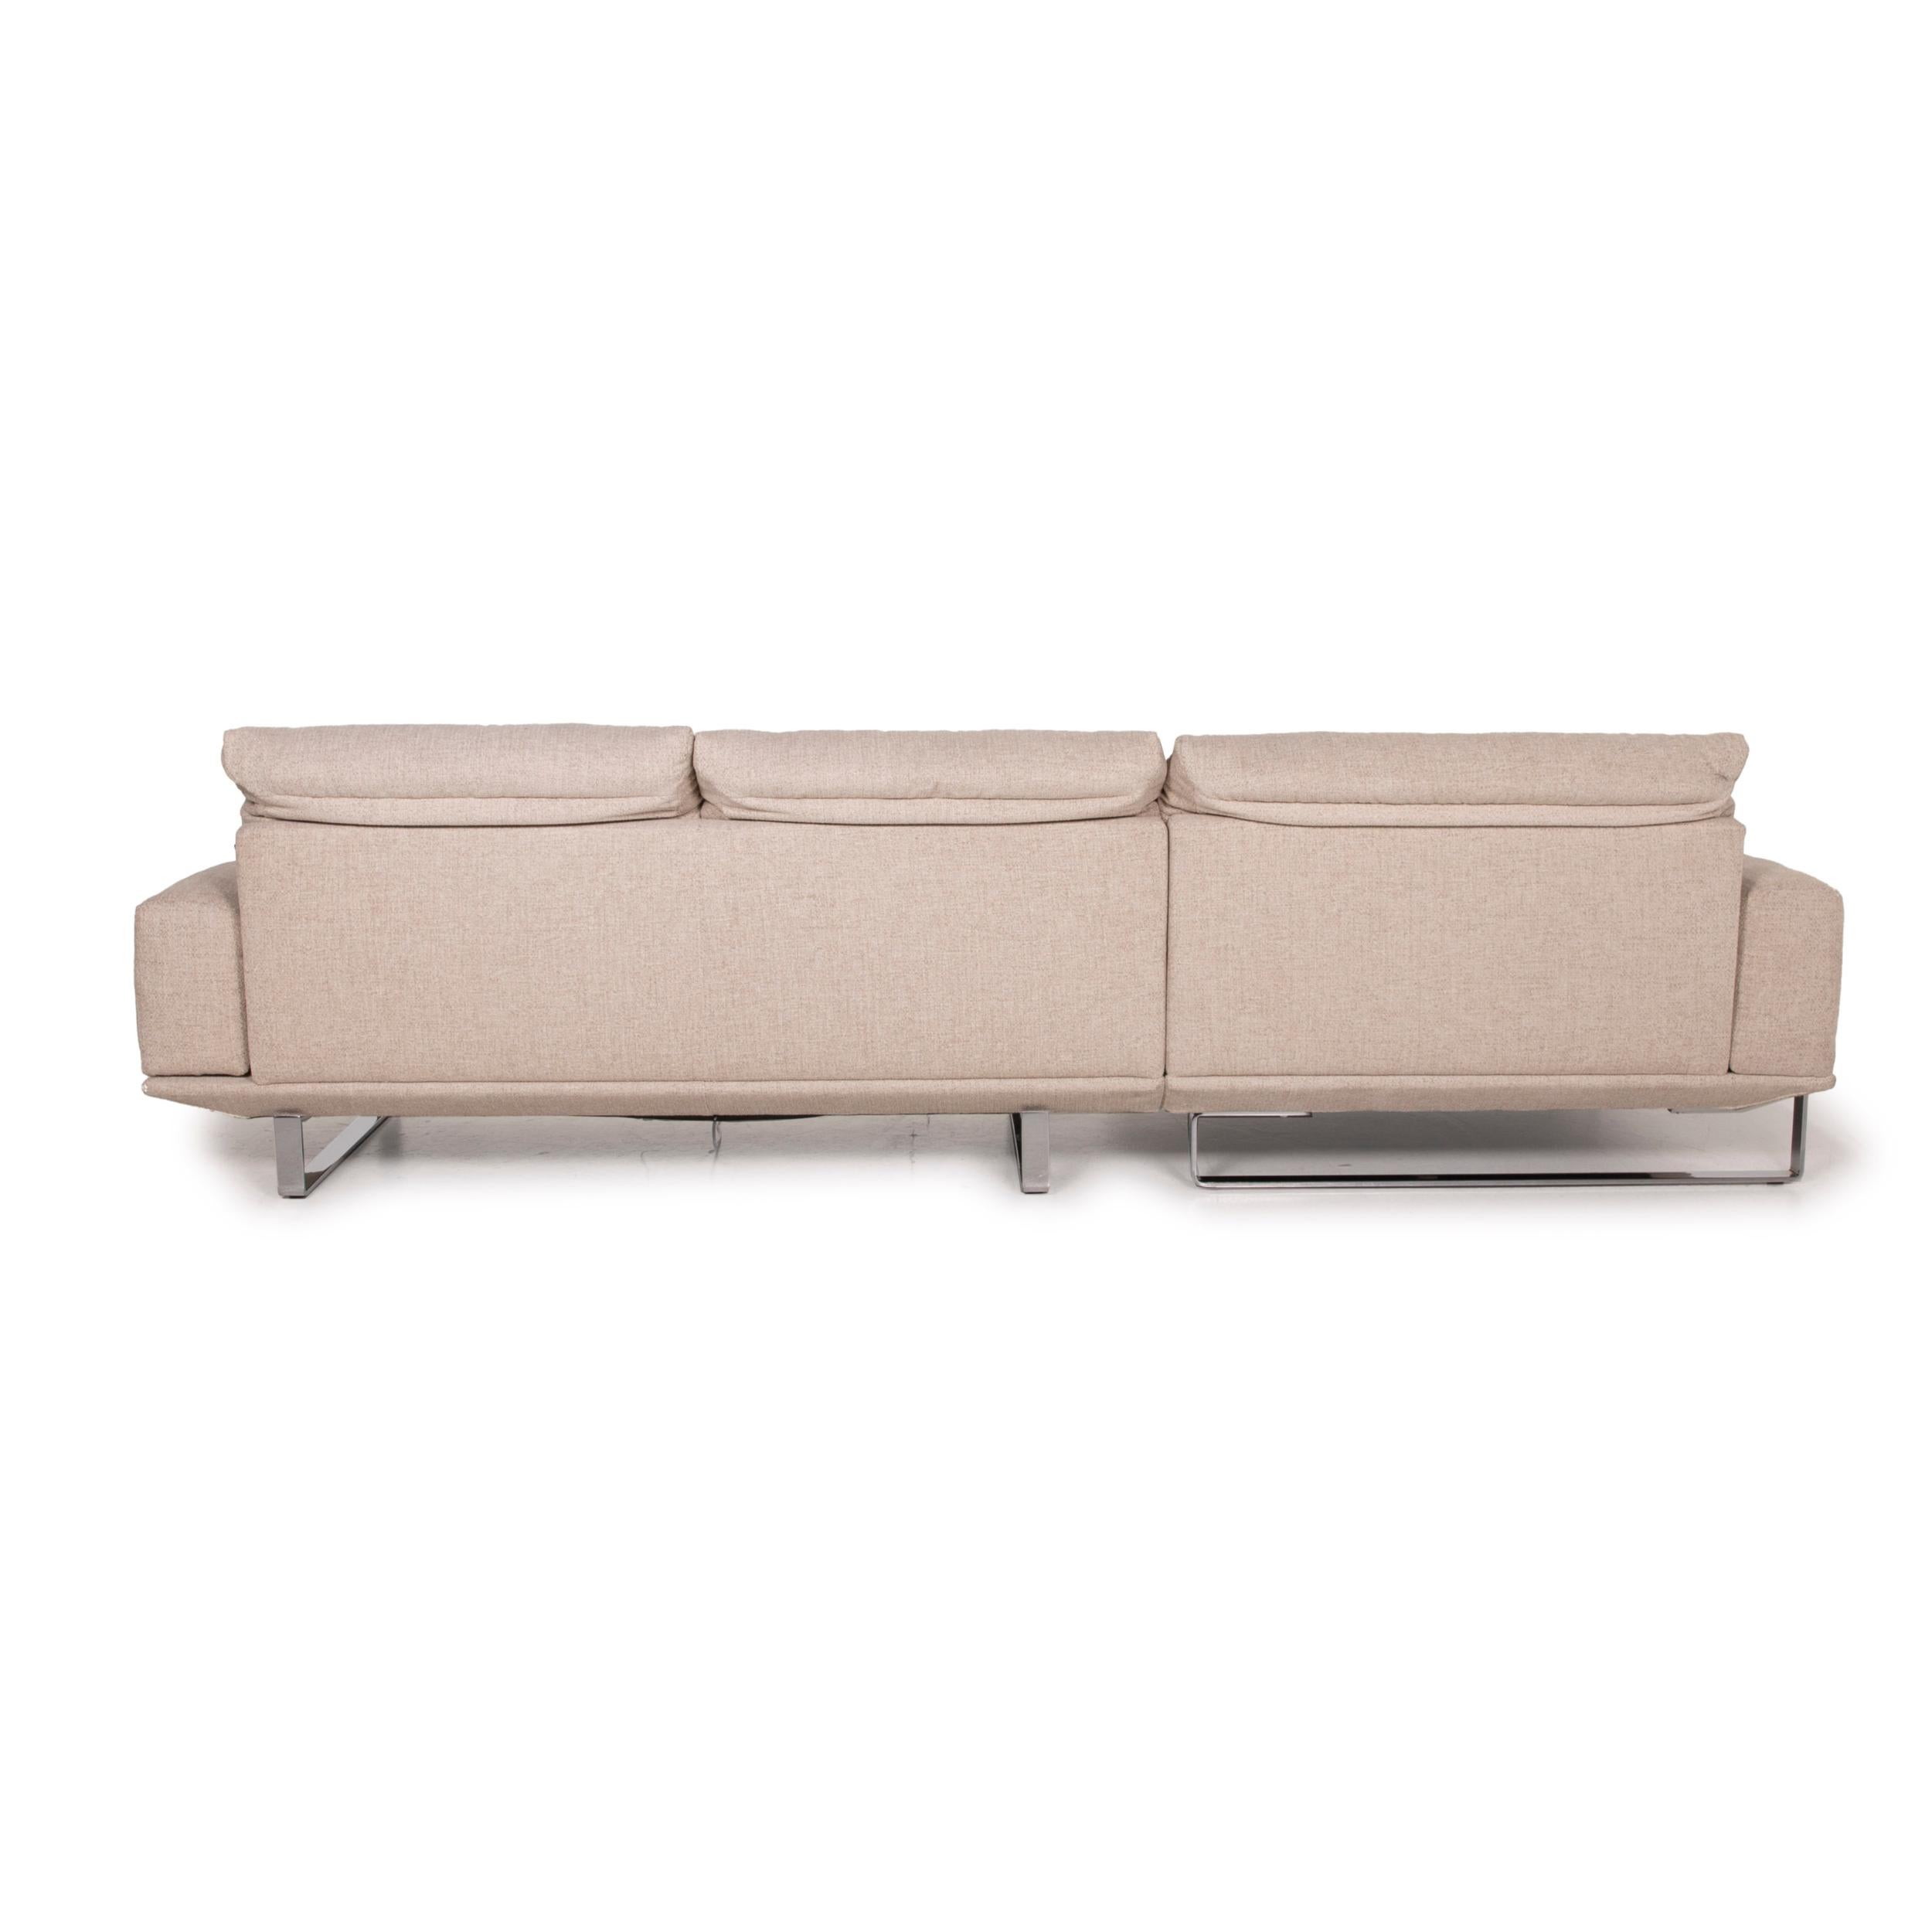 Dieter Knoll Collection Lesina Fabric Sofa Cream Corner Sofa Electrical Function 5